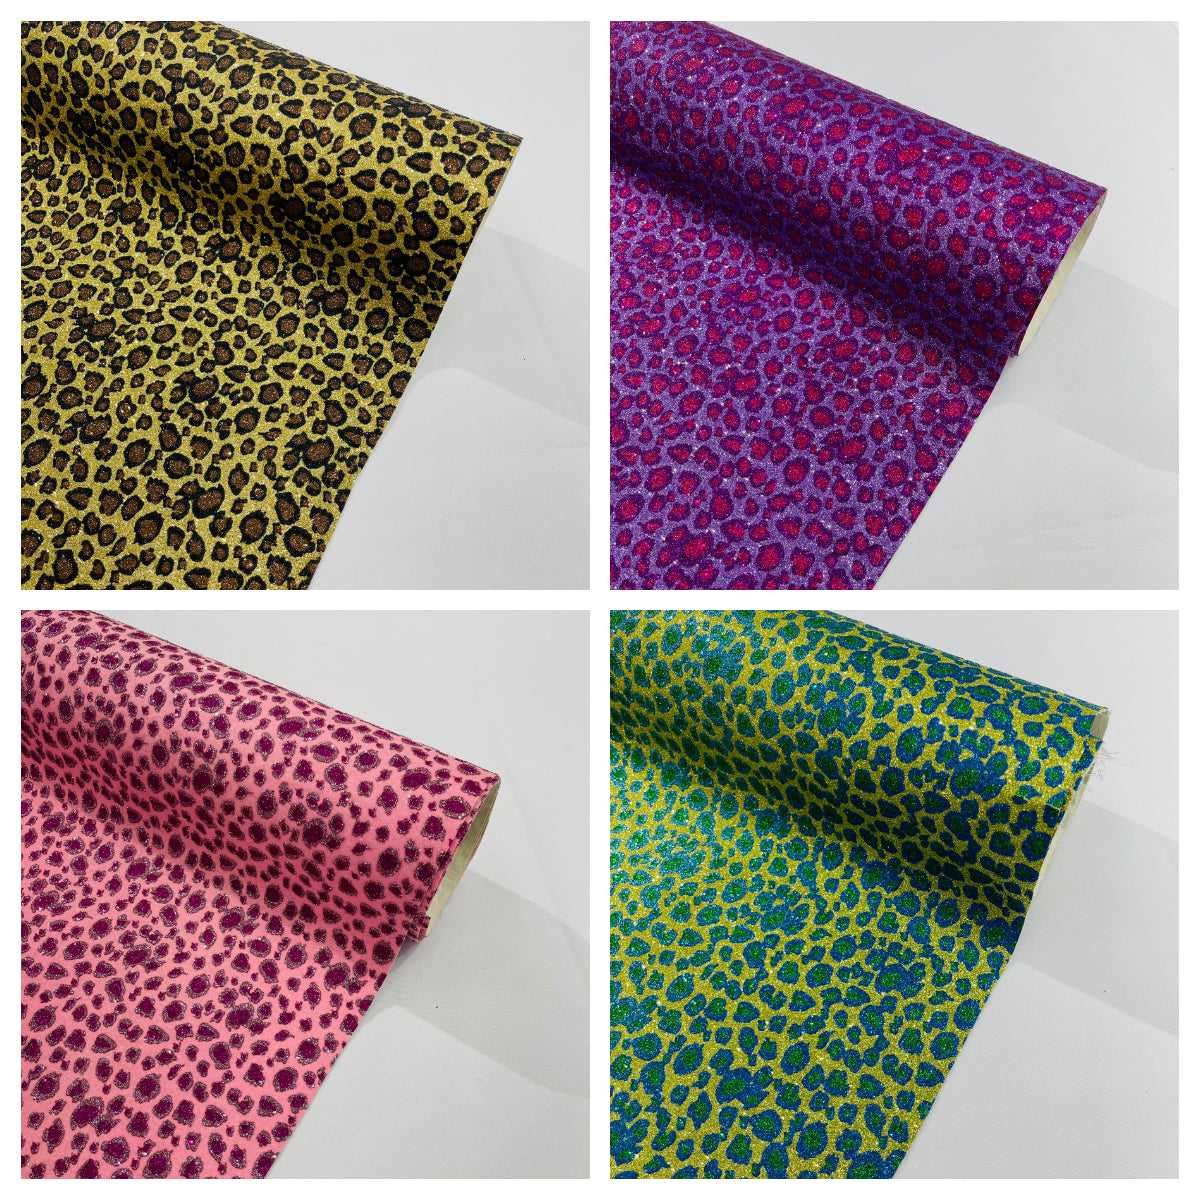 Leopard/ Chita glitter/Sparkle craft Upholstery On A Canvas Backing/Faux vinyl/48” wide.